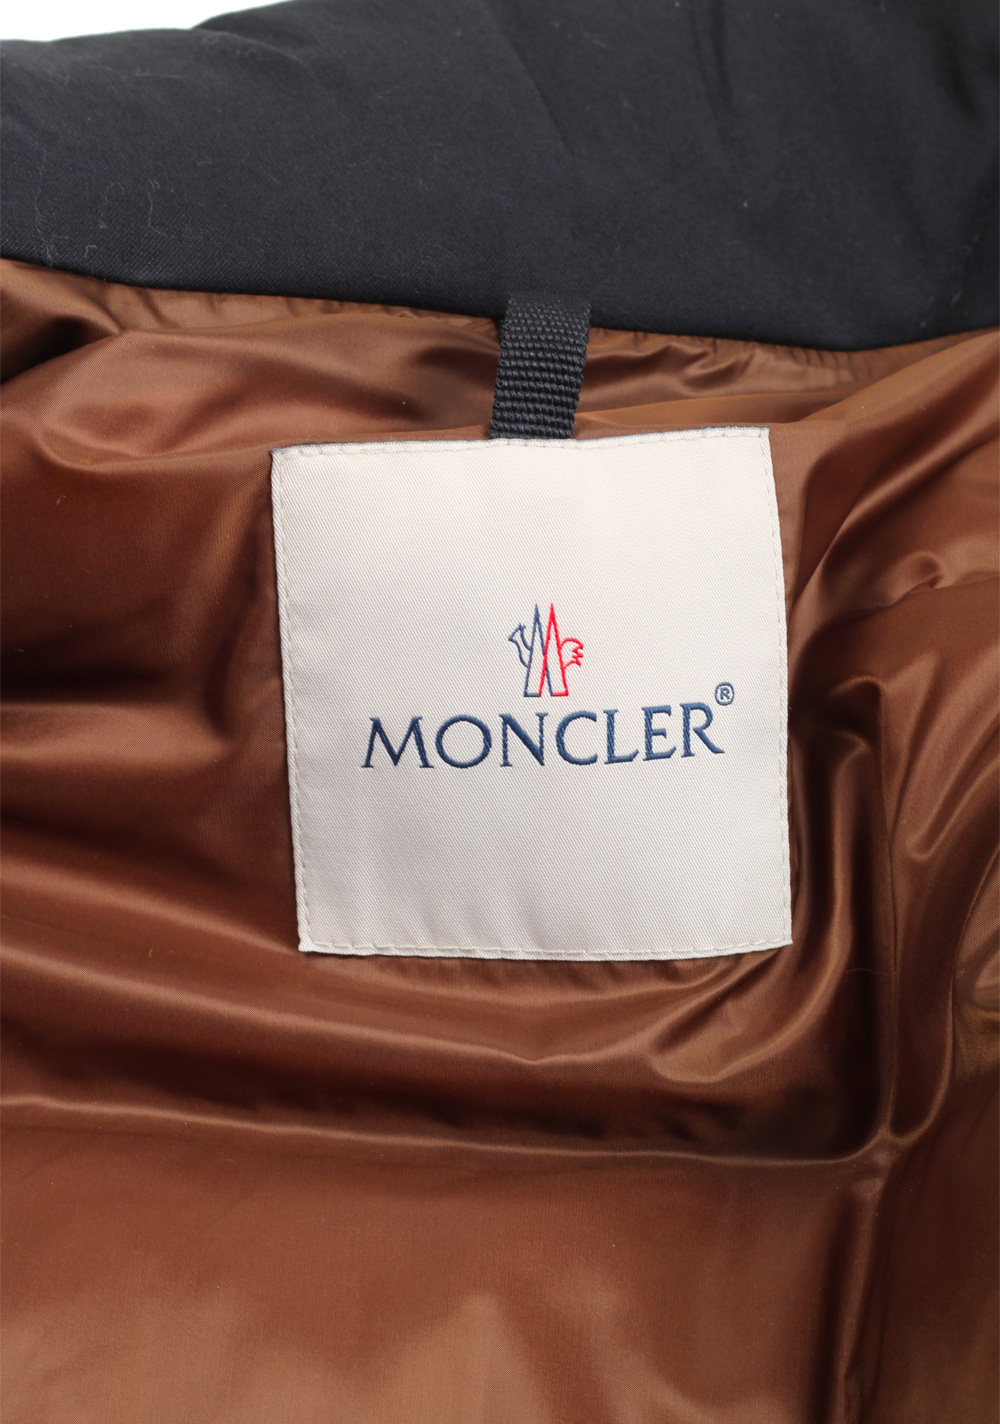 moncler size 6 in us